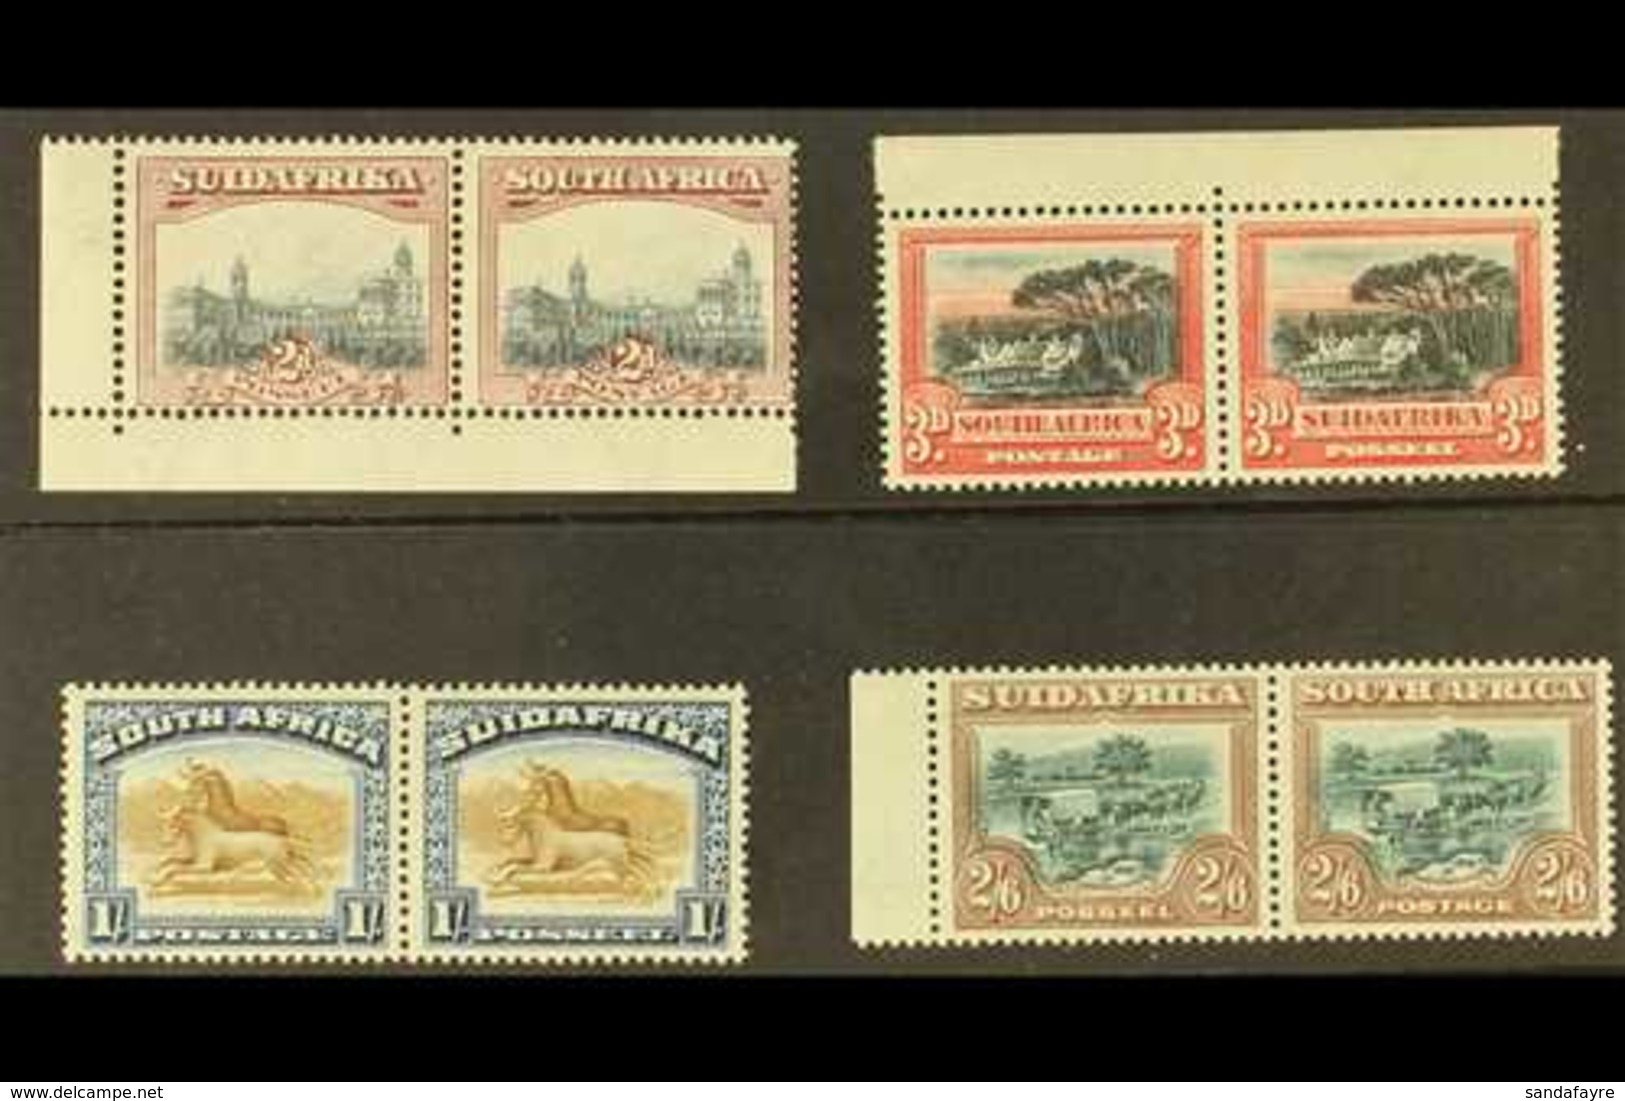 1927 (Recess Printed, Perf 14) 2d, 3d, 1s And 2s6d, SG 34/37, Very Fine Mint. (4 Pairs) For More Images, Please Visit Ht - Unclassified